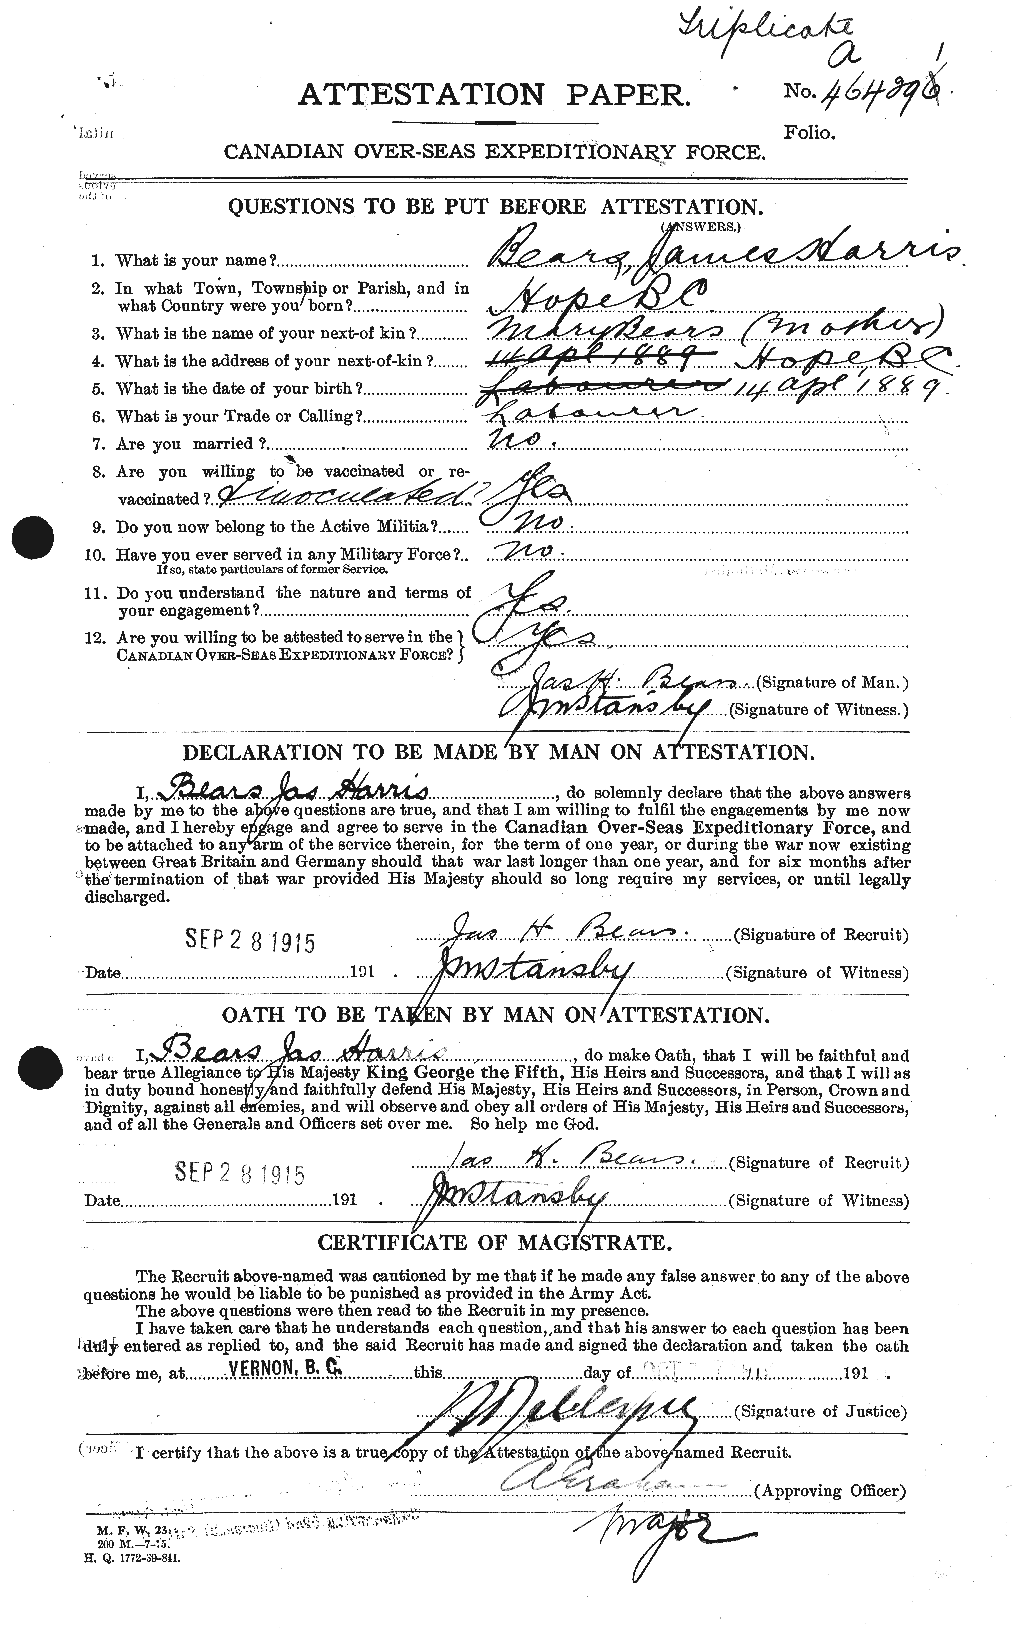 Personnel Records of the First World War - CEF 230386a